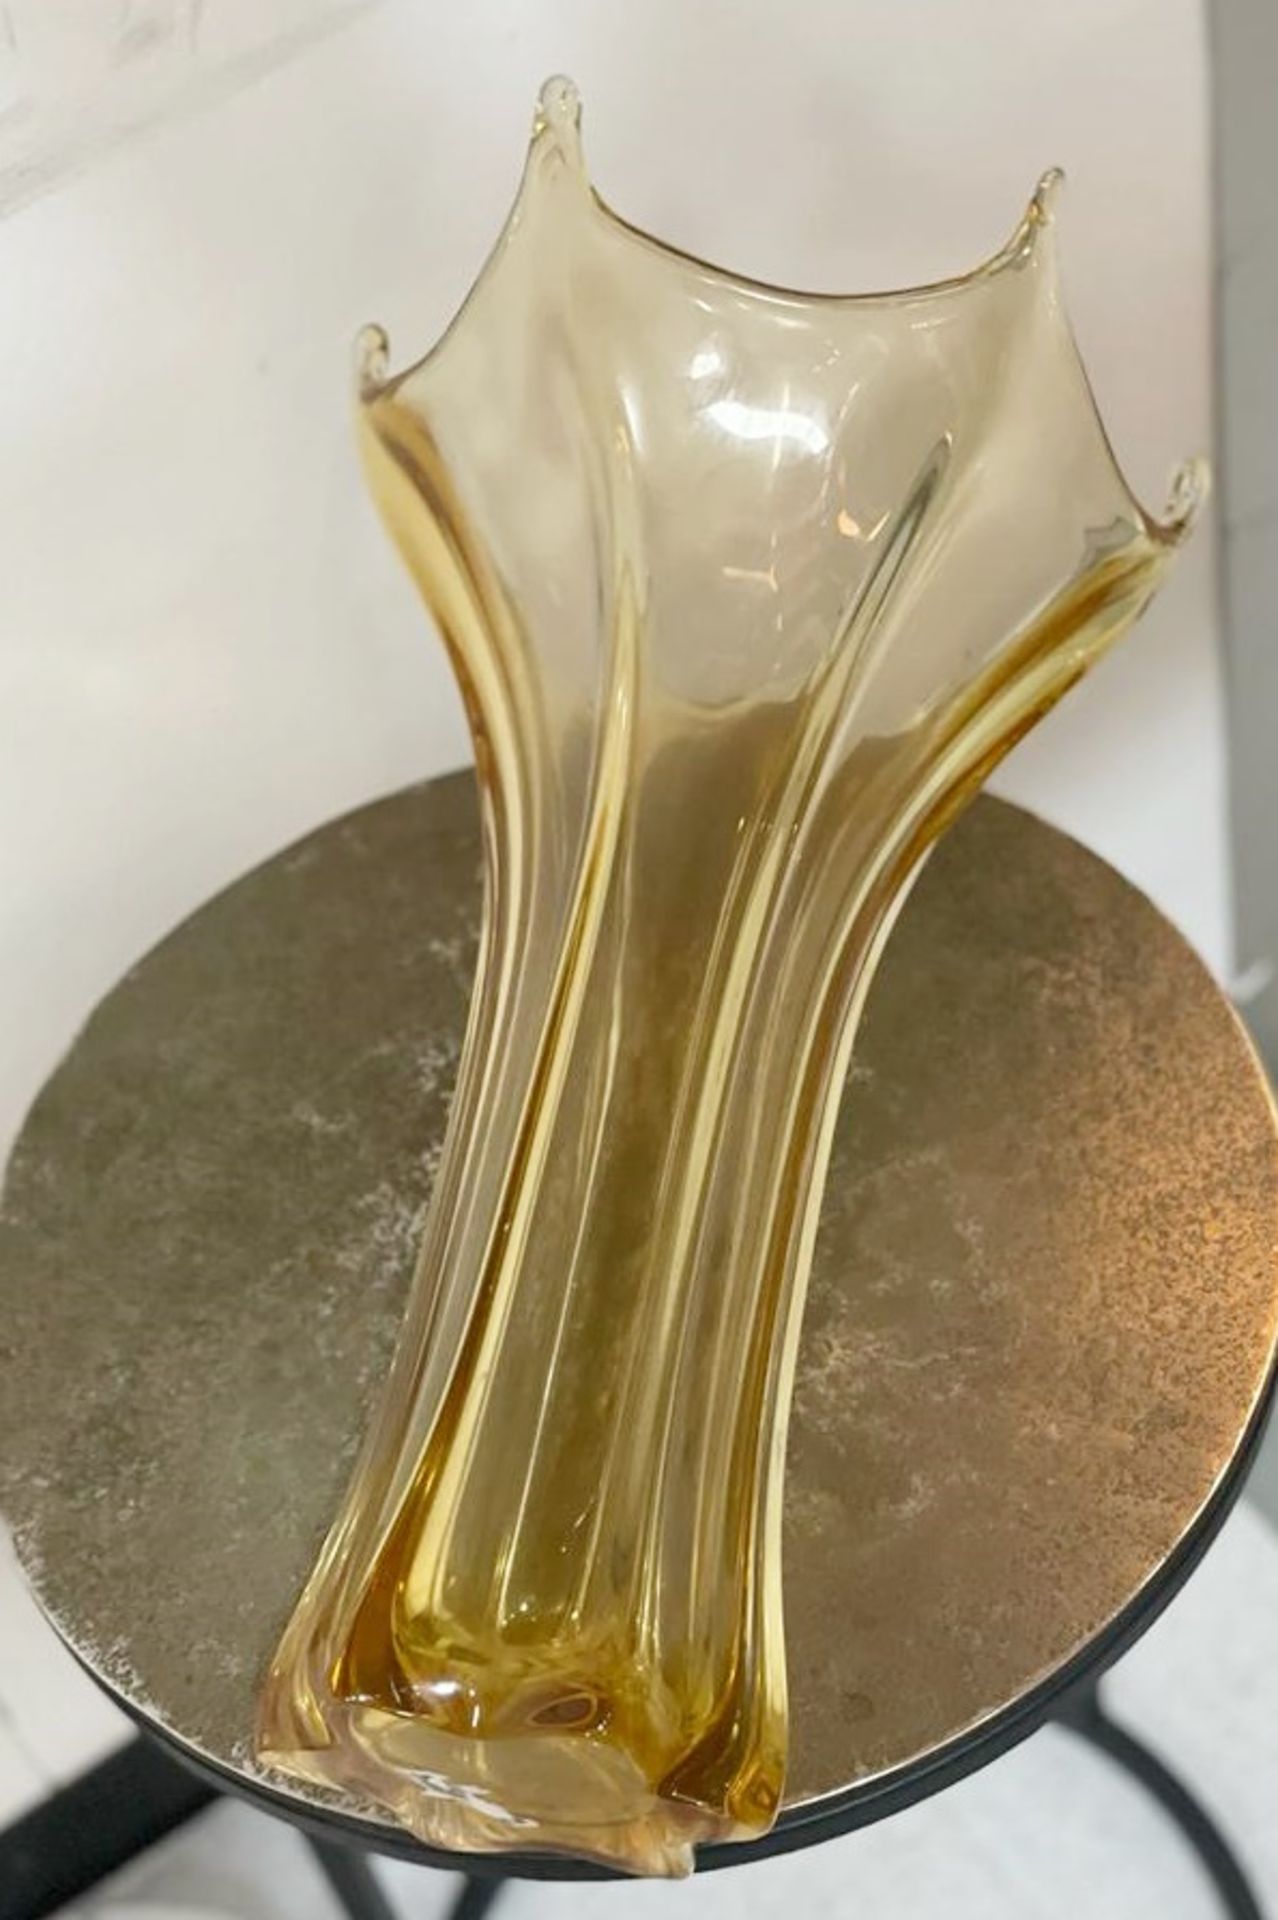 1 x Tall Tinted Yellow Glass Vase - Ref: AUR158  - CL652 - Location: Altrincham WA14 Dimensions: - Image 2 of 2